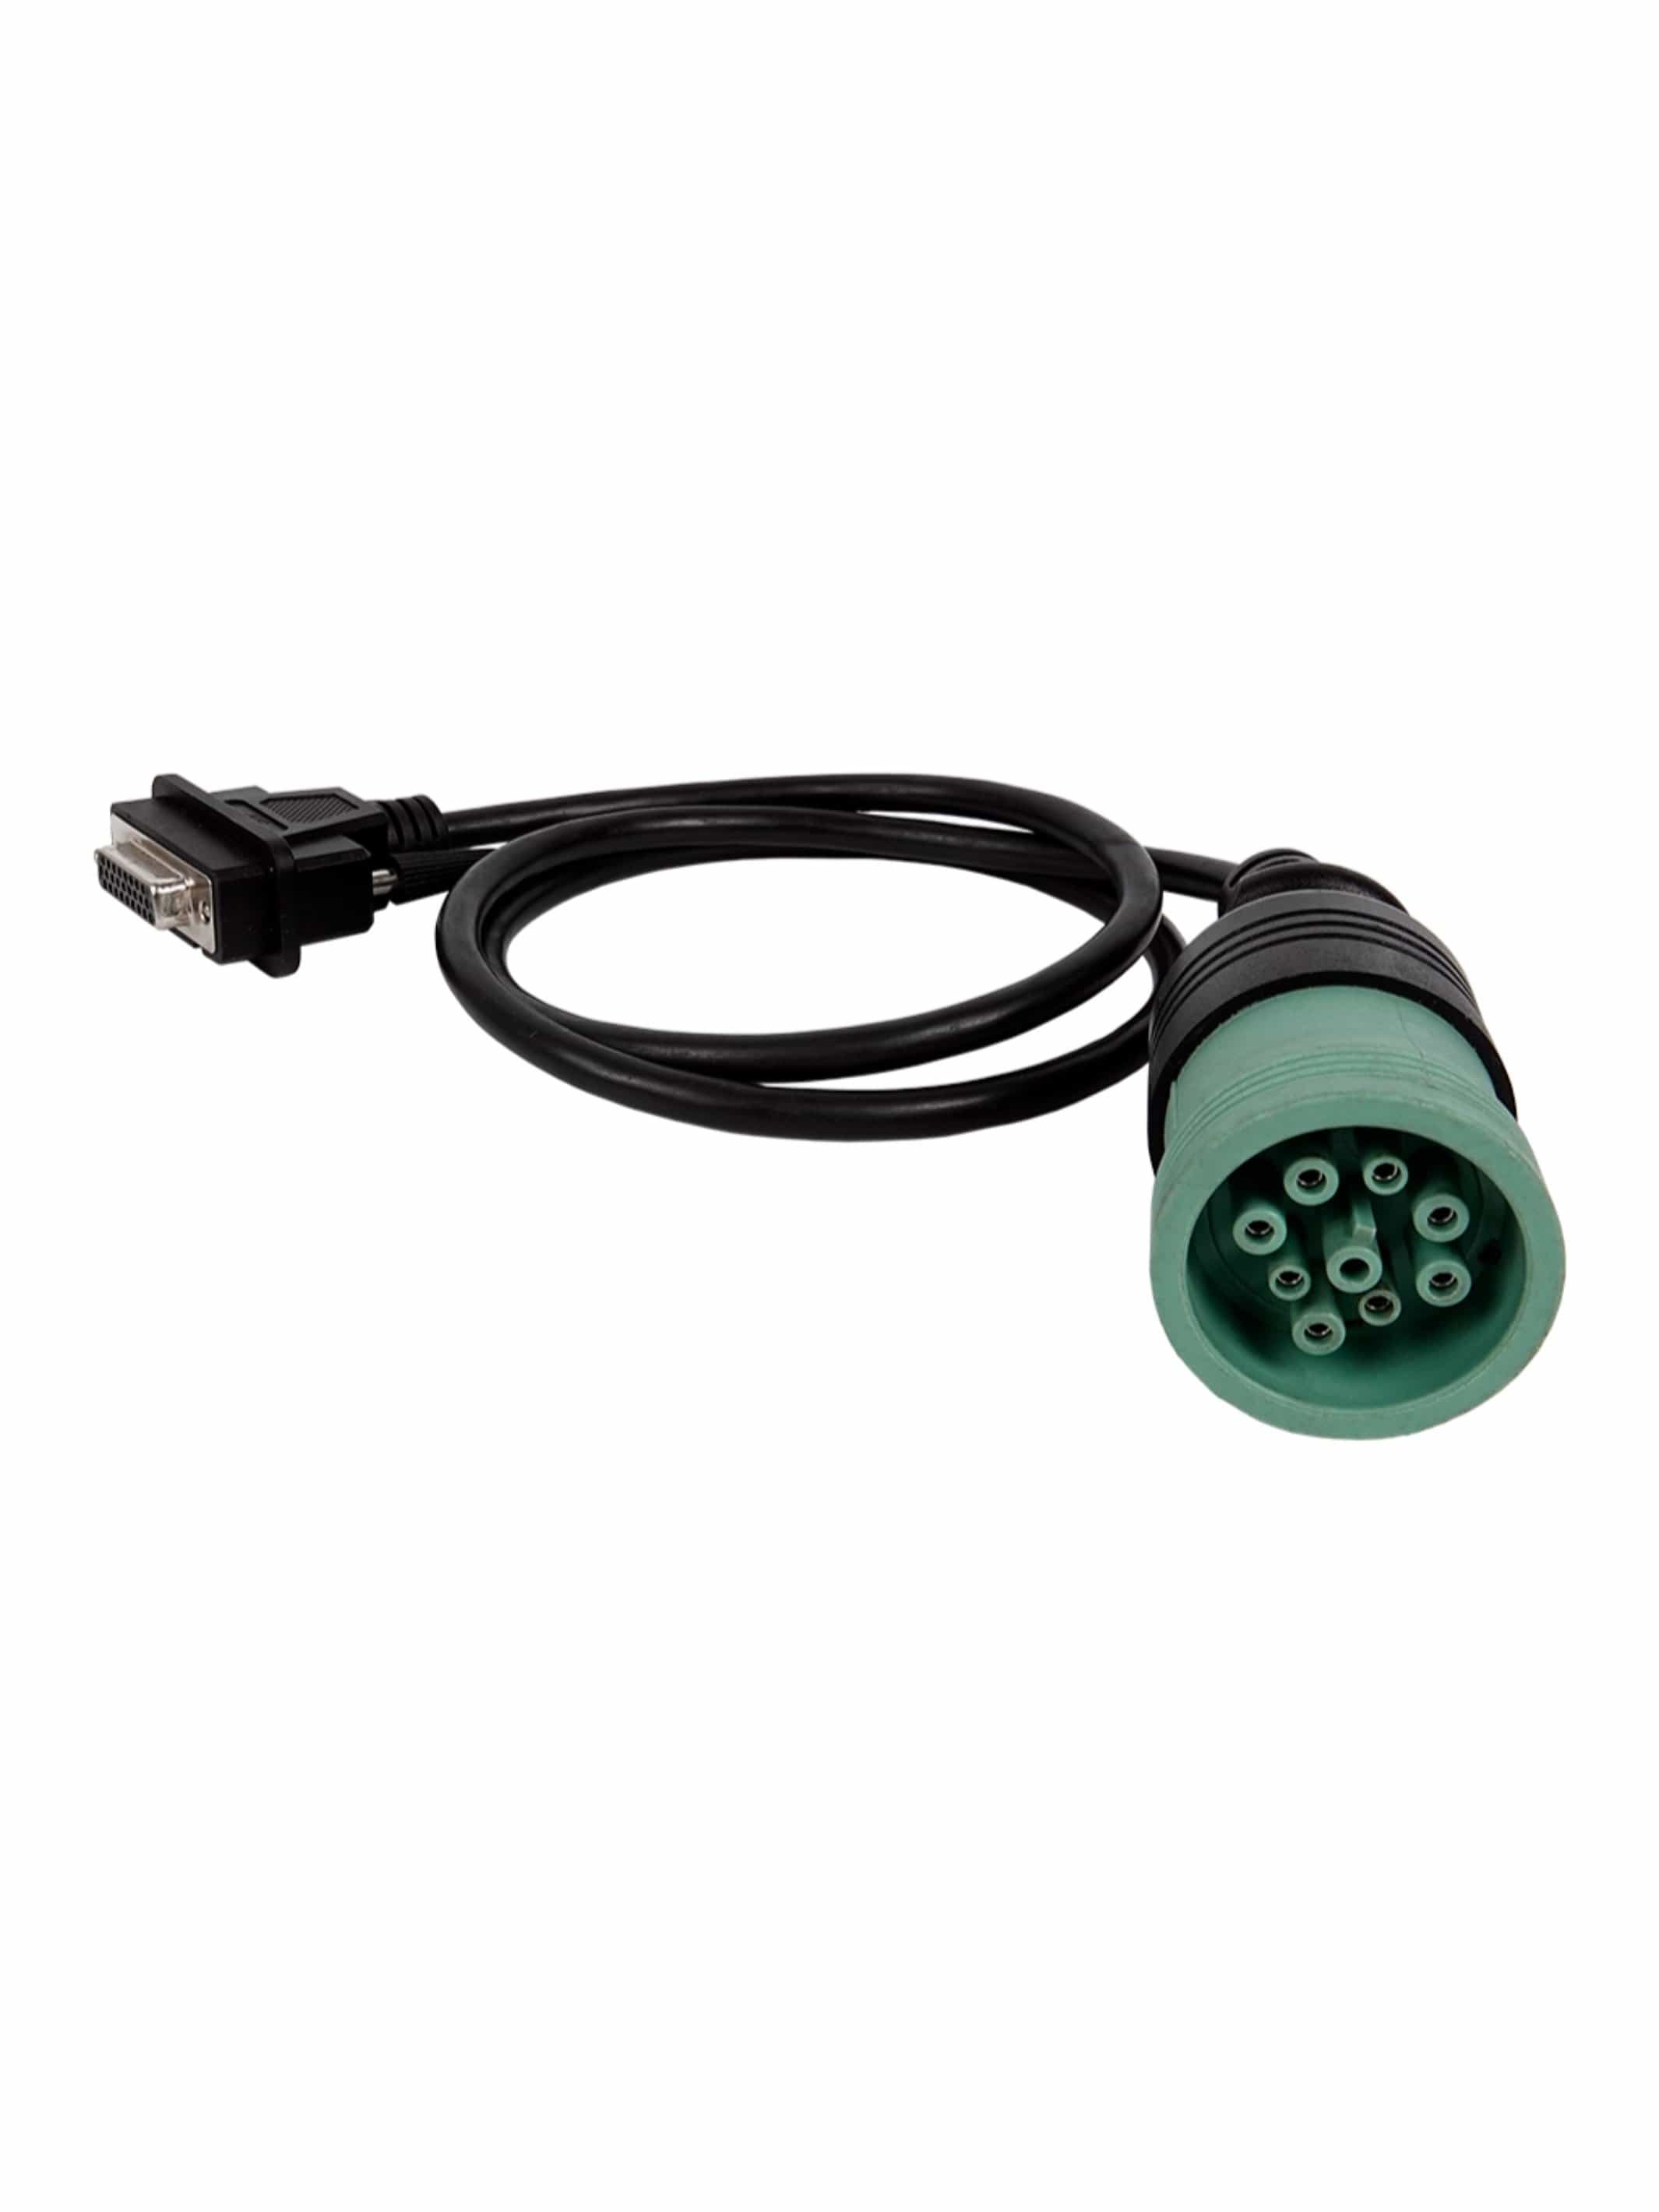 JDC217.9 Deutsch 9 Pin Type 2 Green Diagnostics Cable - Jaltest Agricultural & Construction, Heavy Equipment MH, Power Systems Deluxe Diagnostic Tool Kit